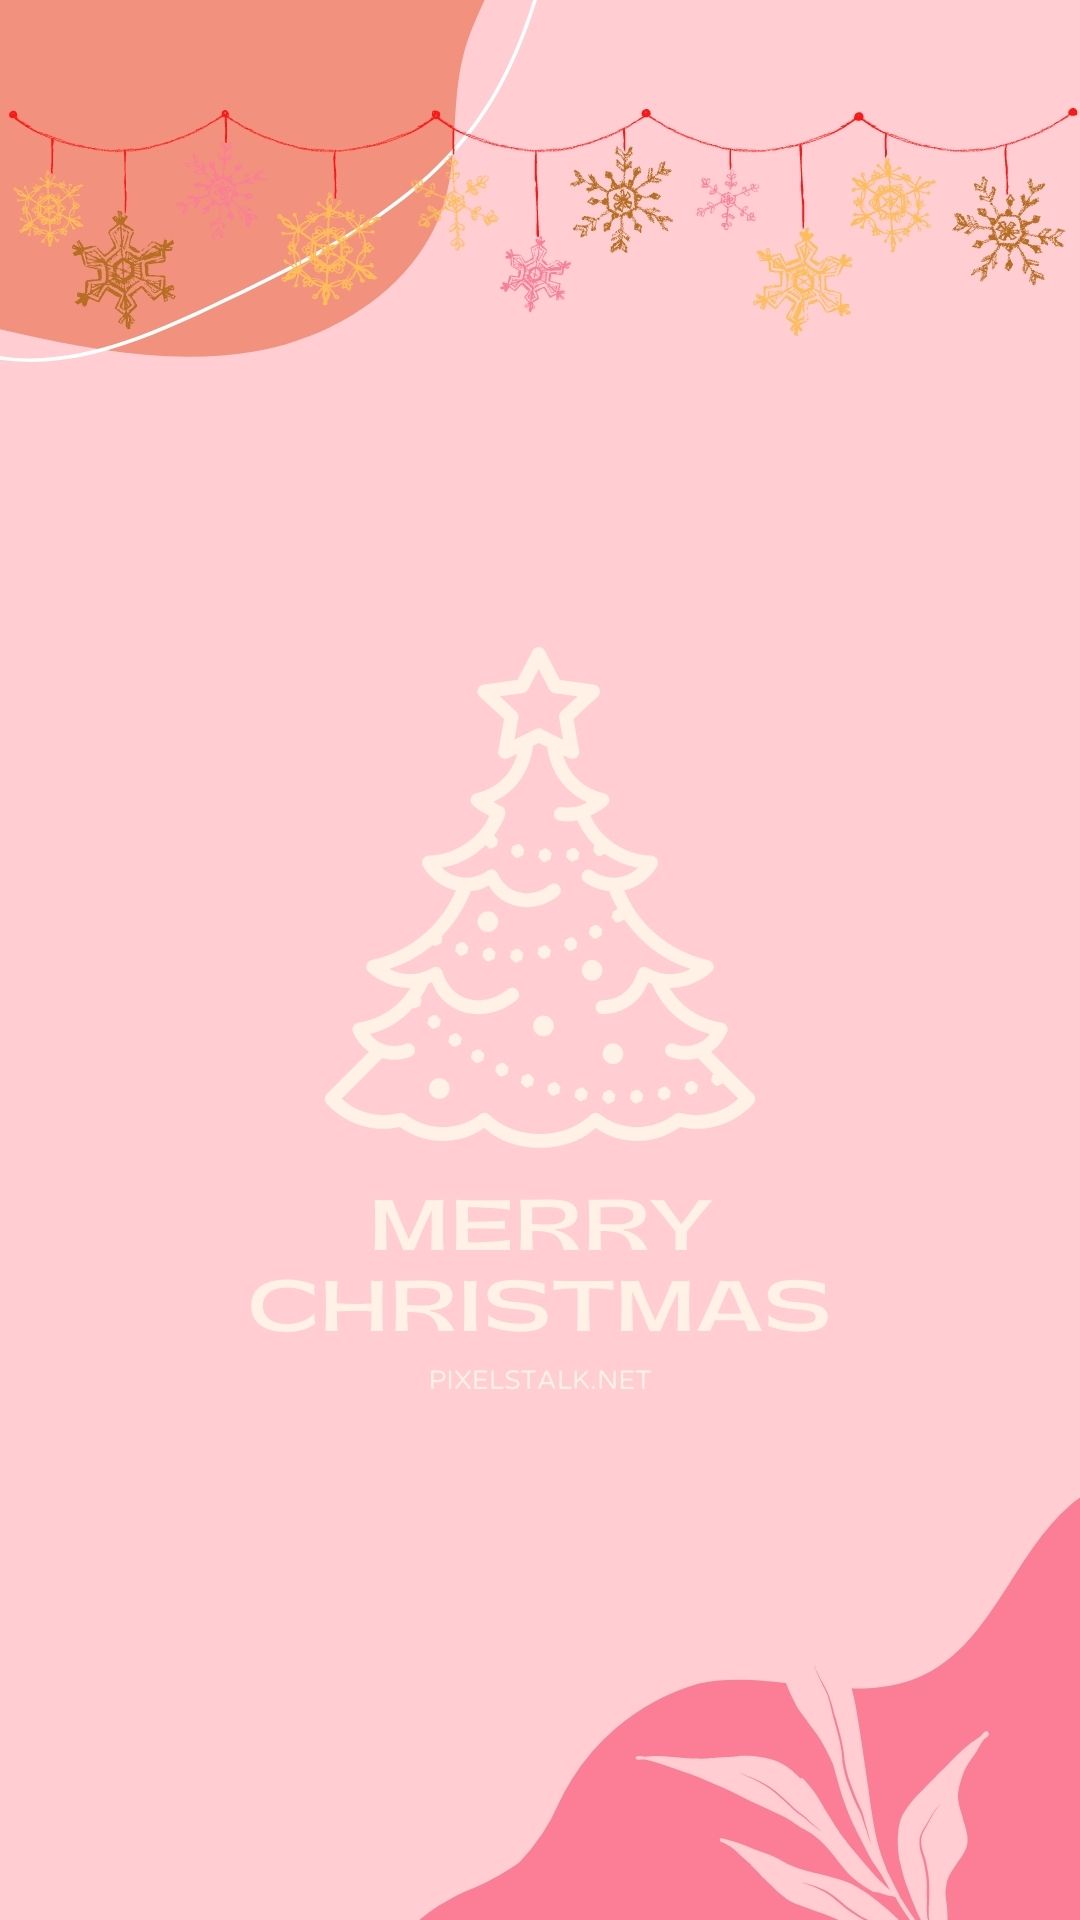 864533 Pink Christmas Background Images Stock Photos  Vectors   Shutterstock